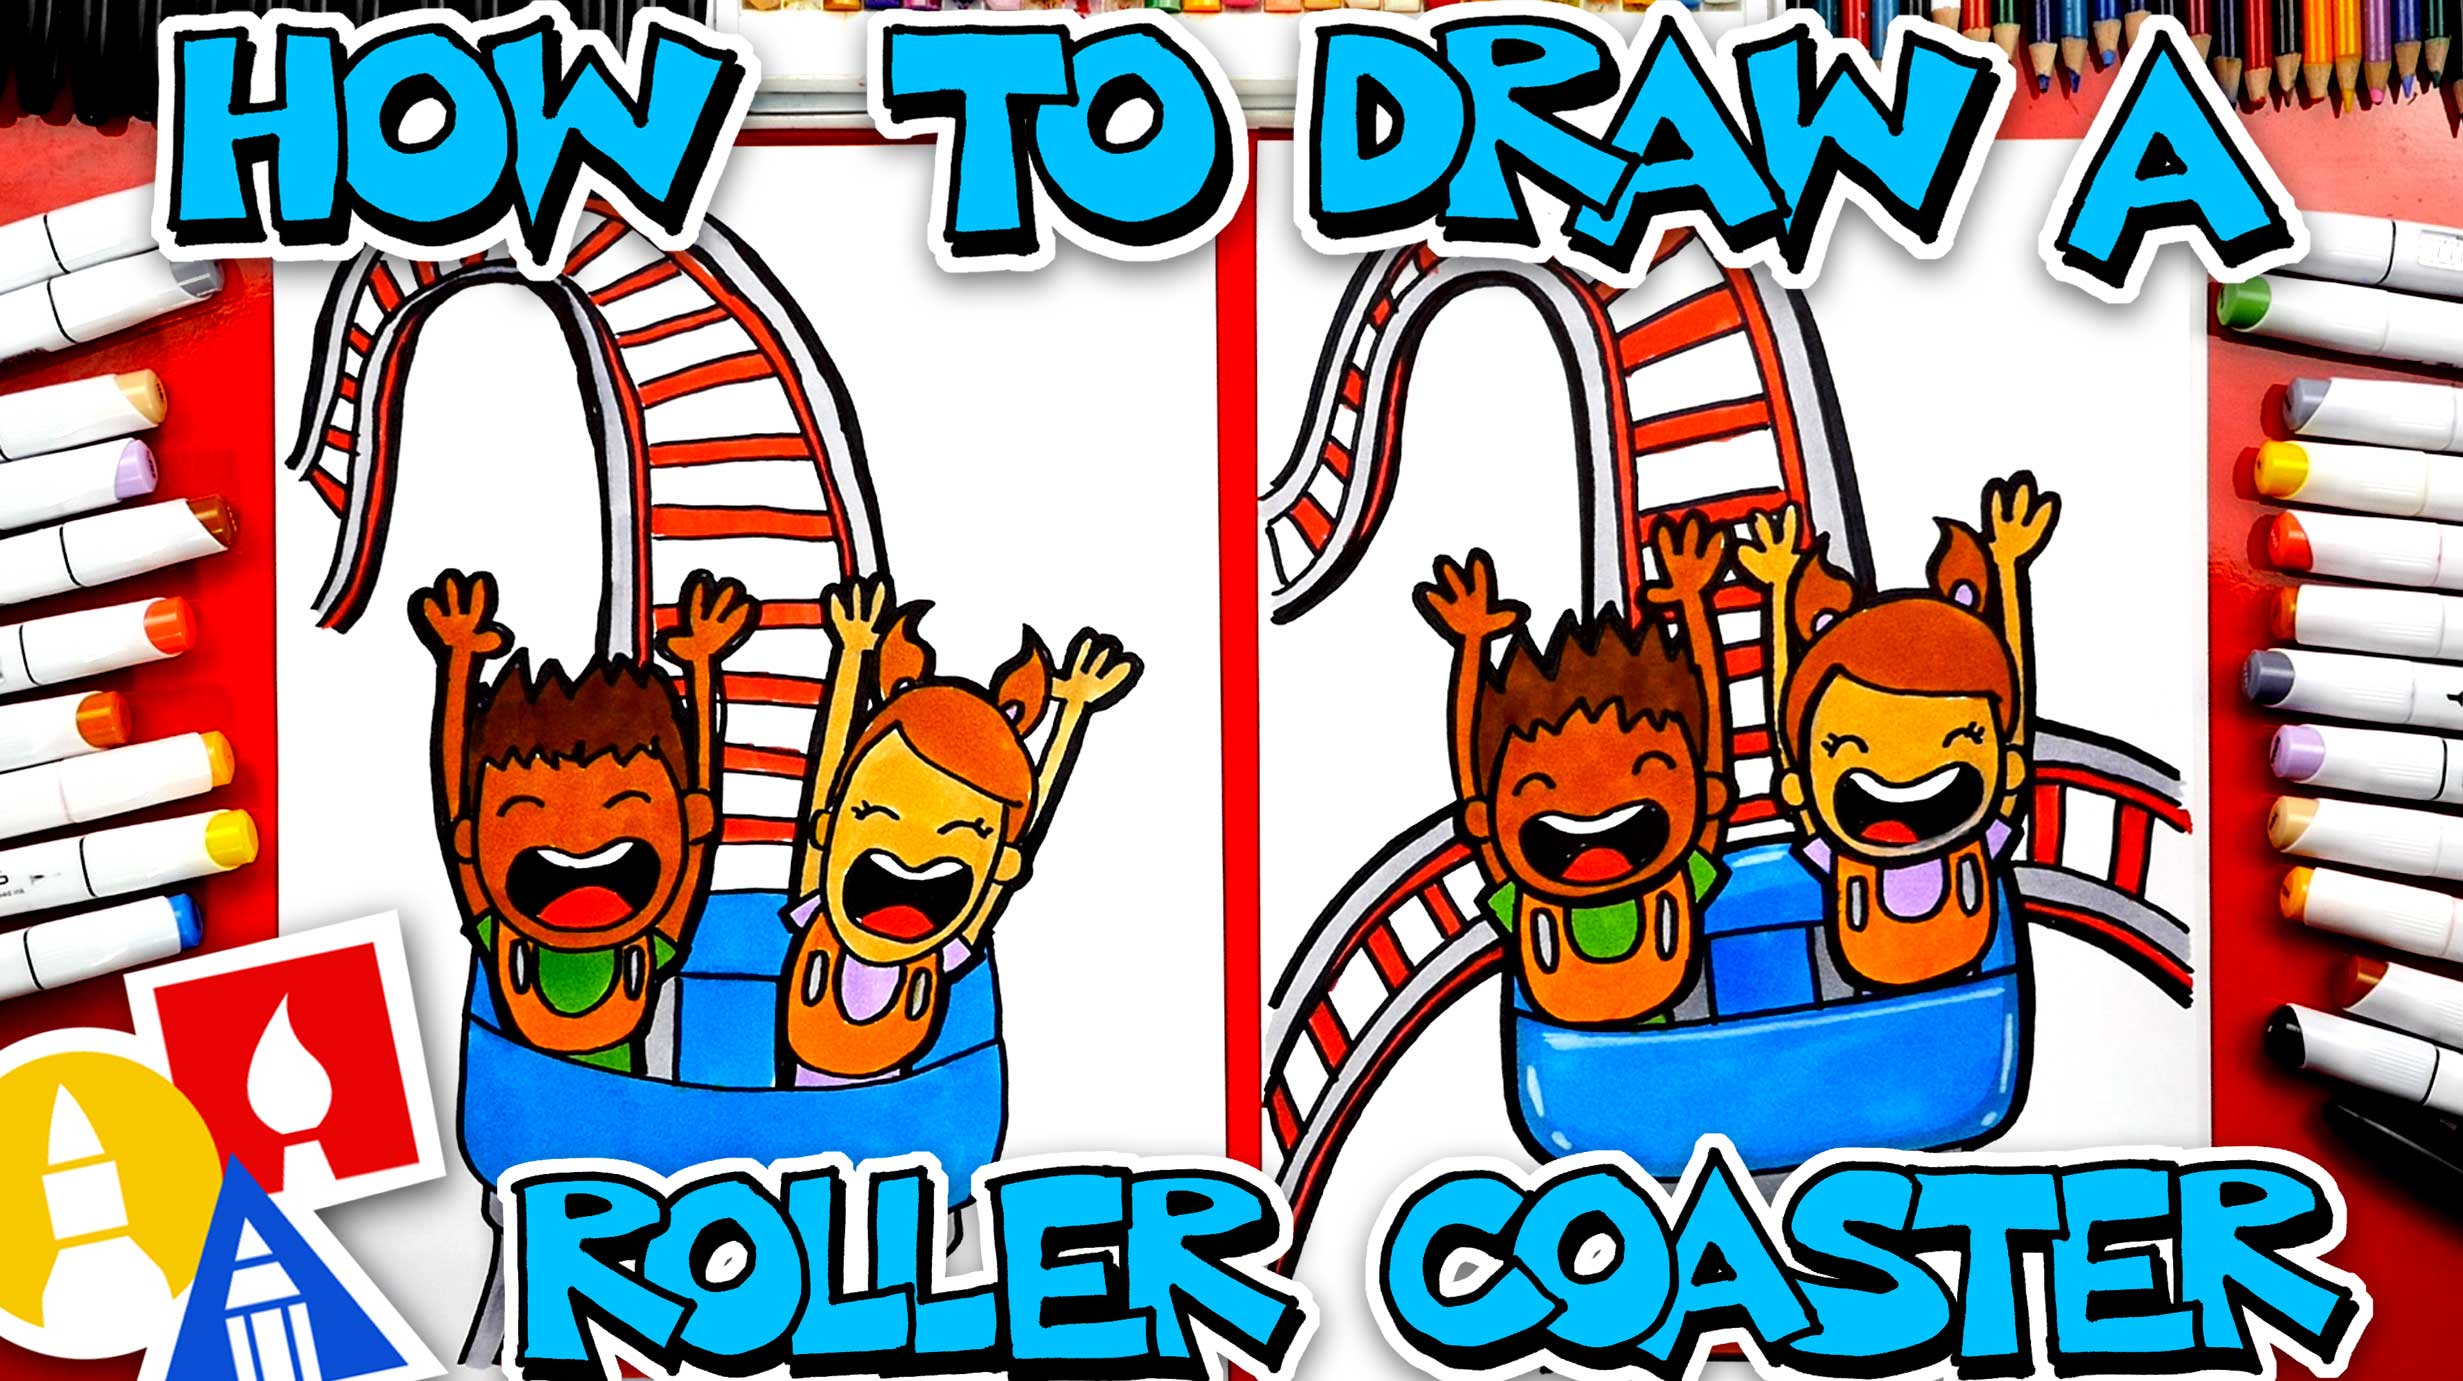 How To Draw A Roller Coaster Art For Kids Hub